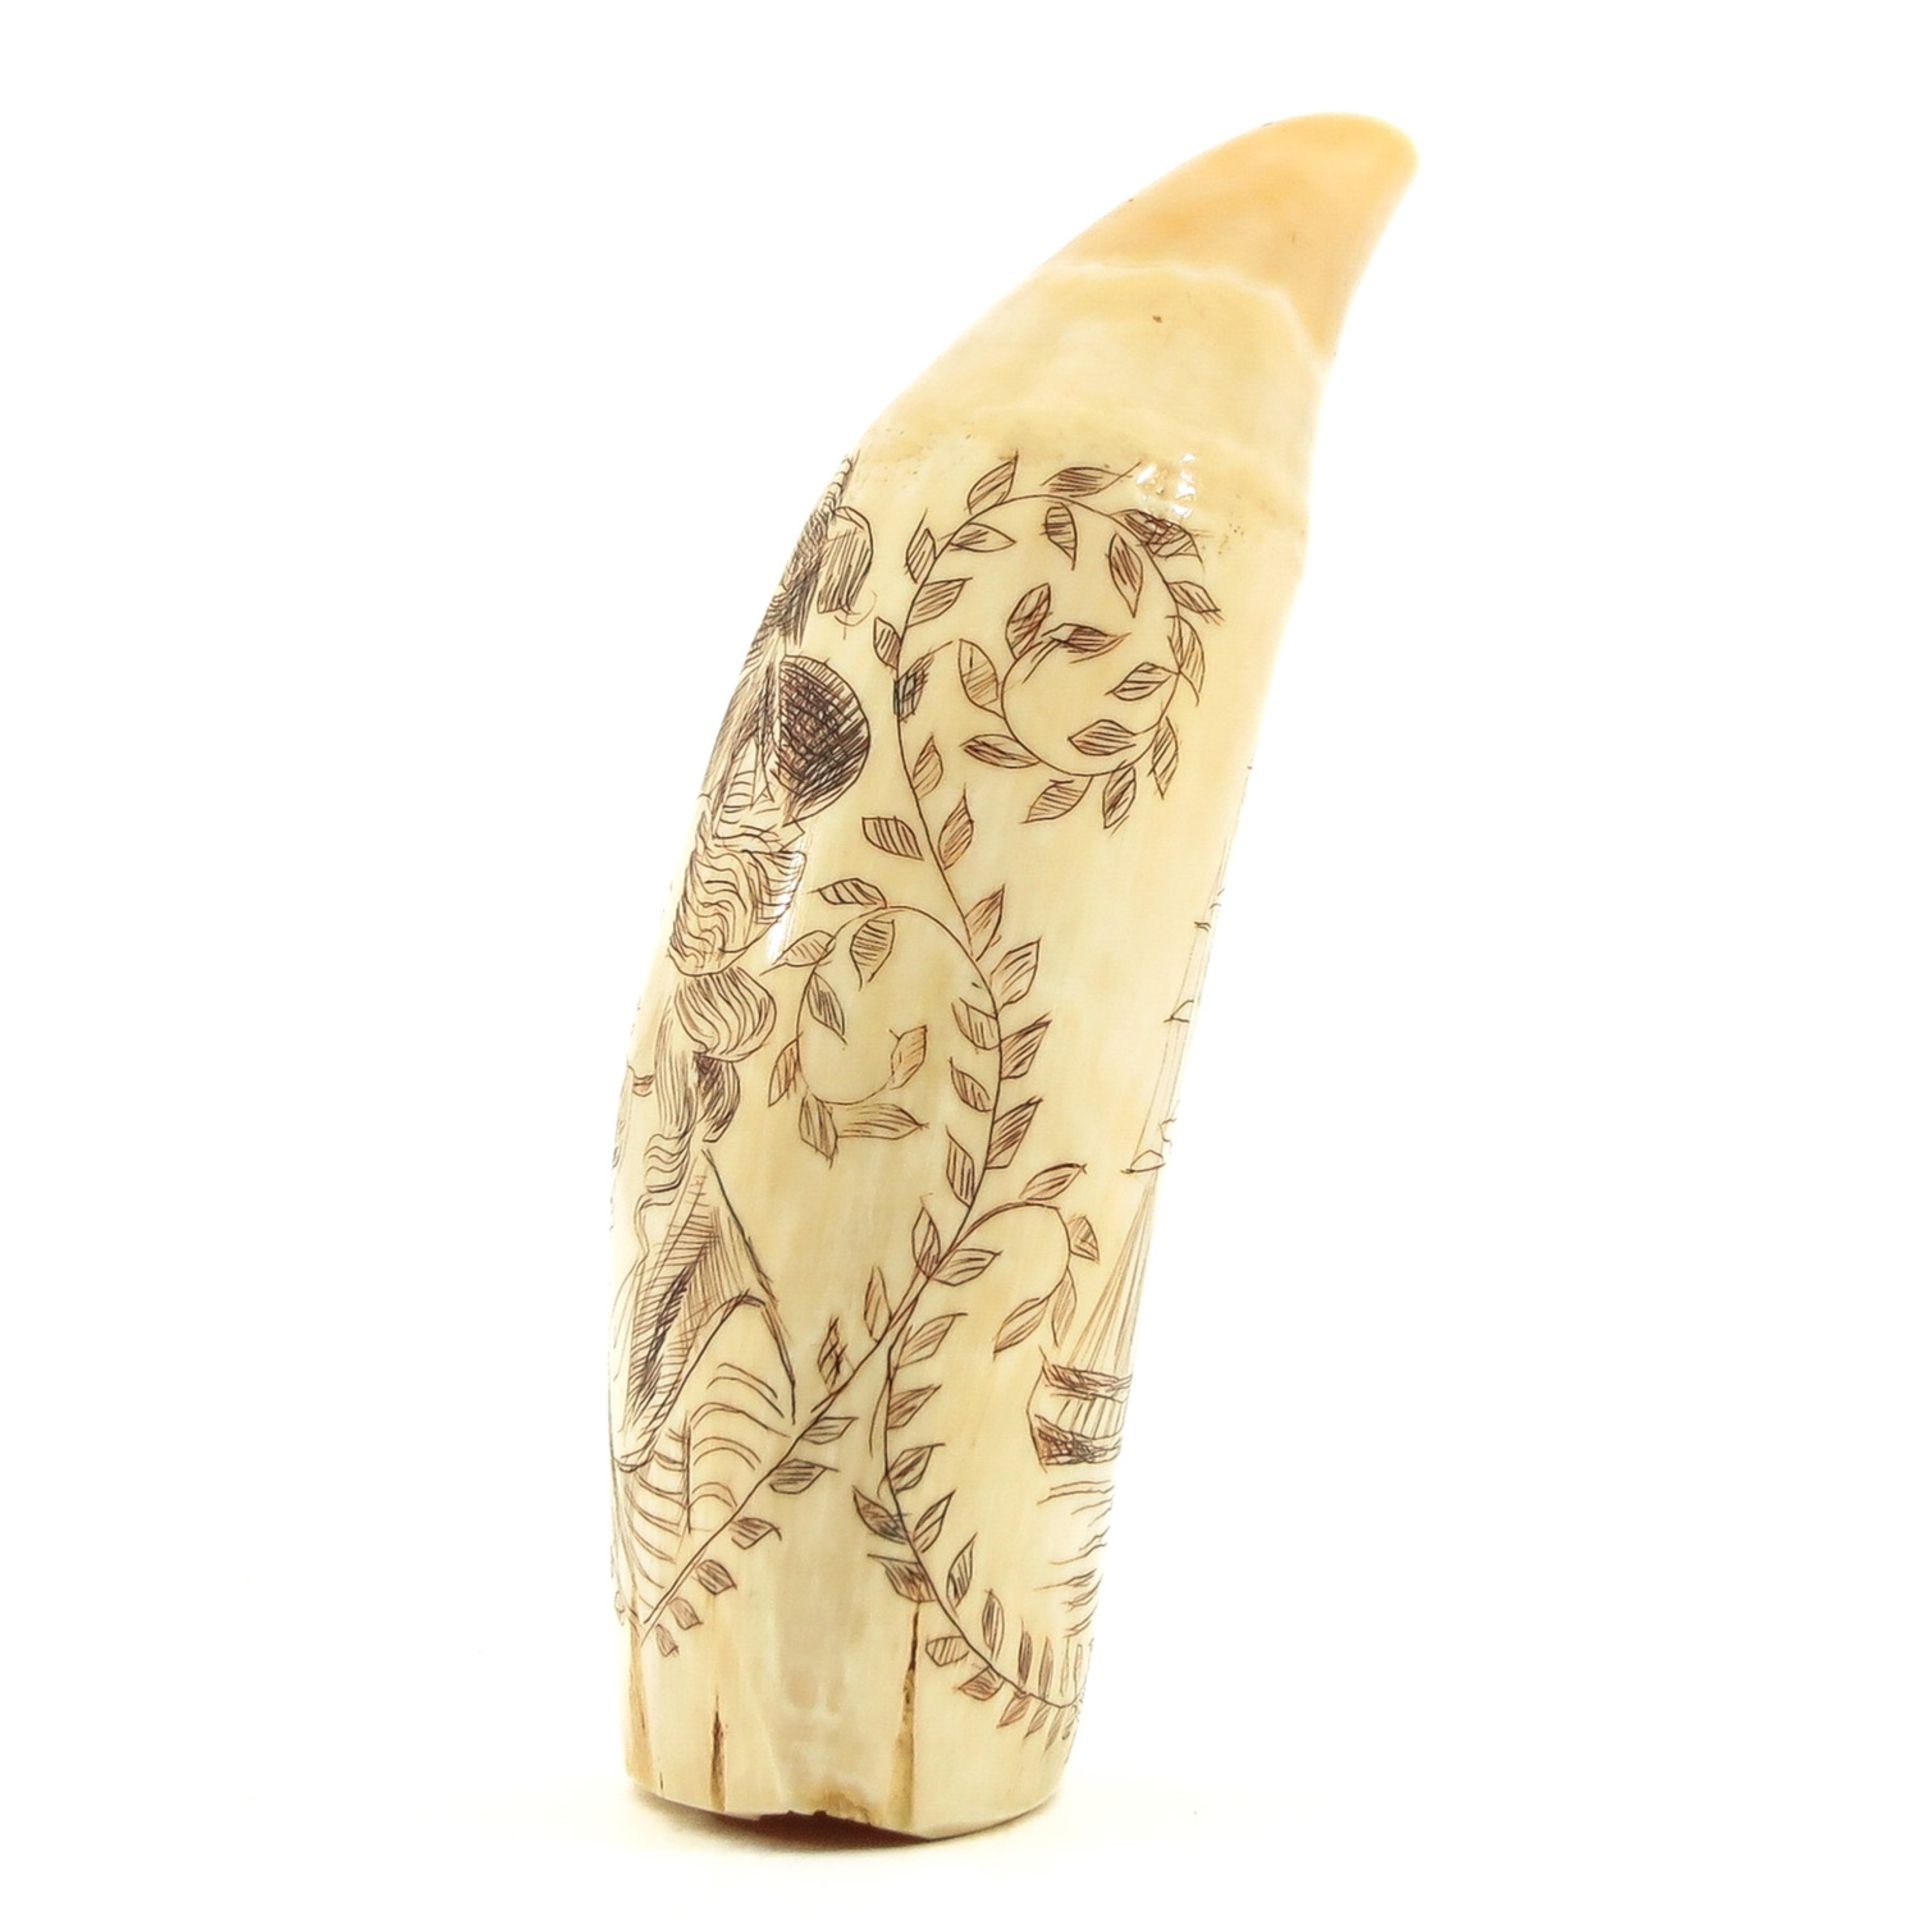 A 19th Century Scrimshaw Depicting Lady - Image 4 of 8